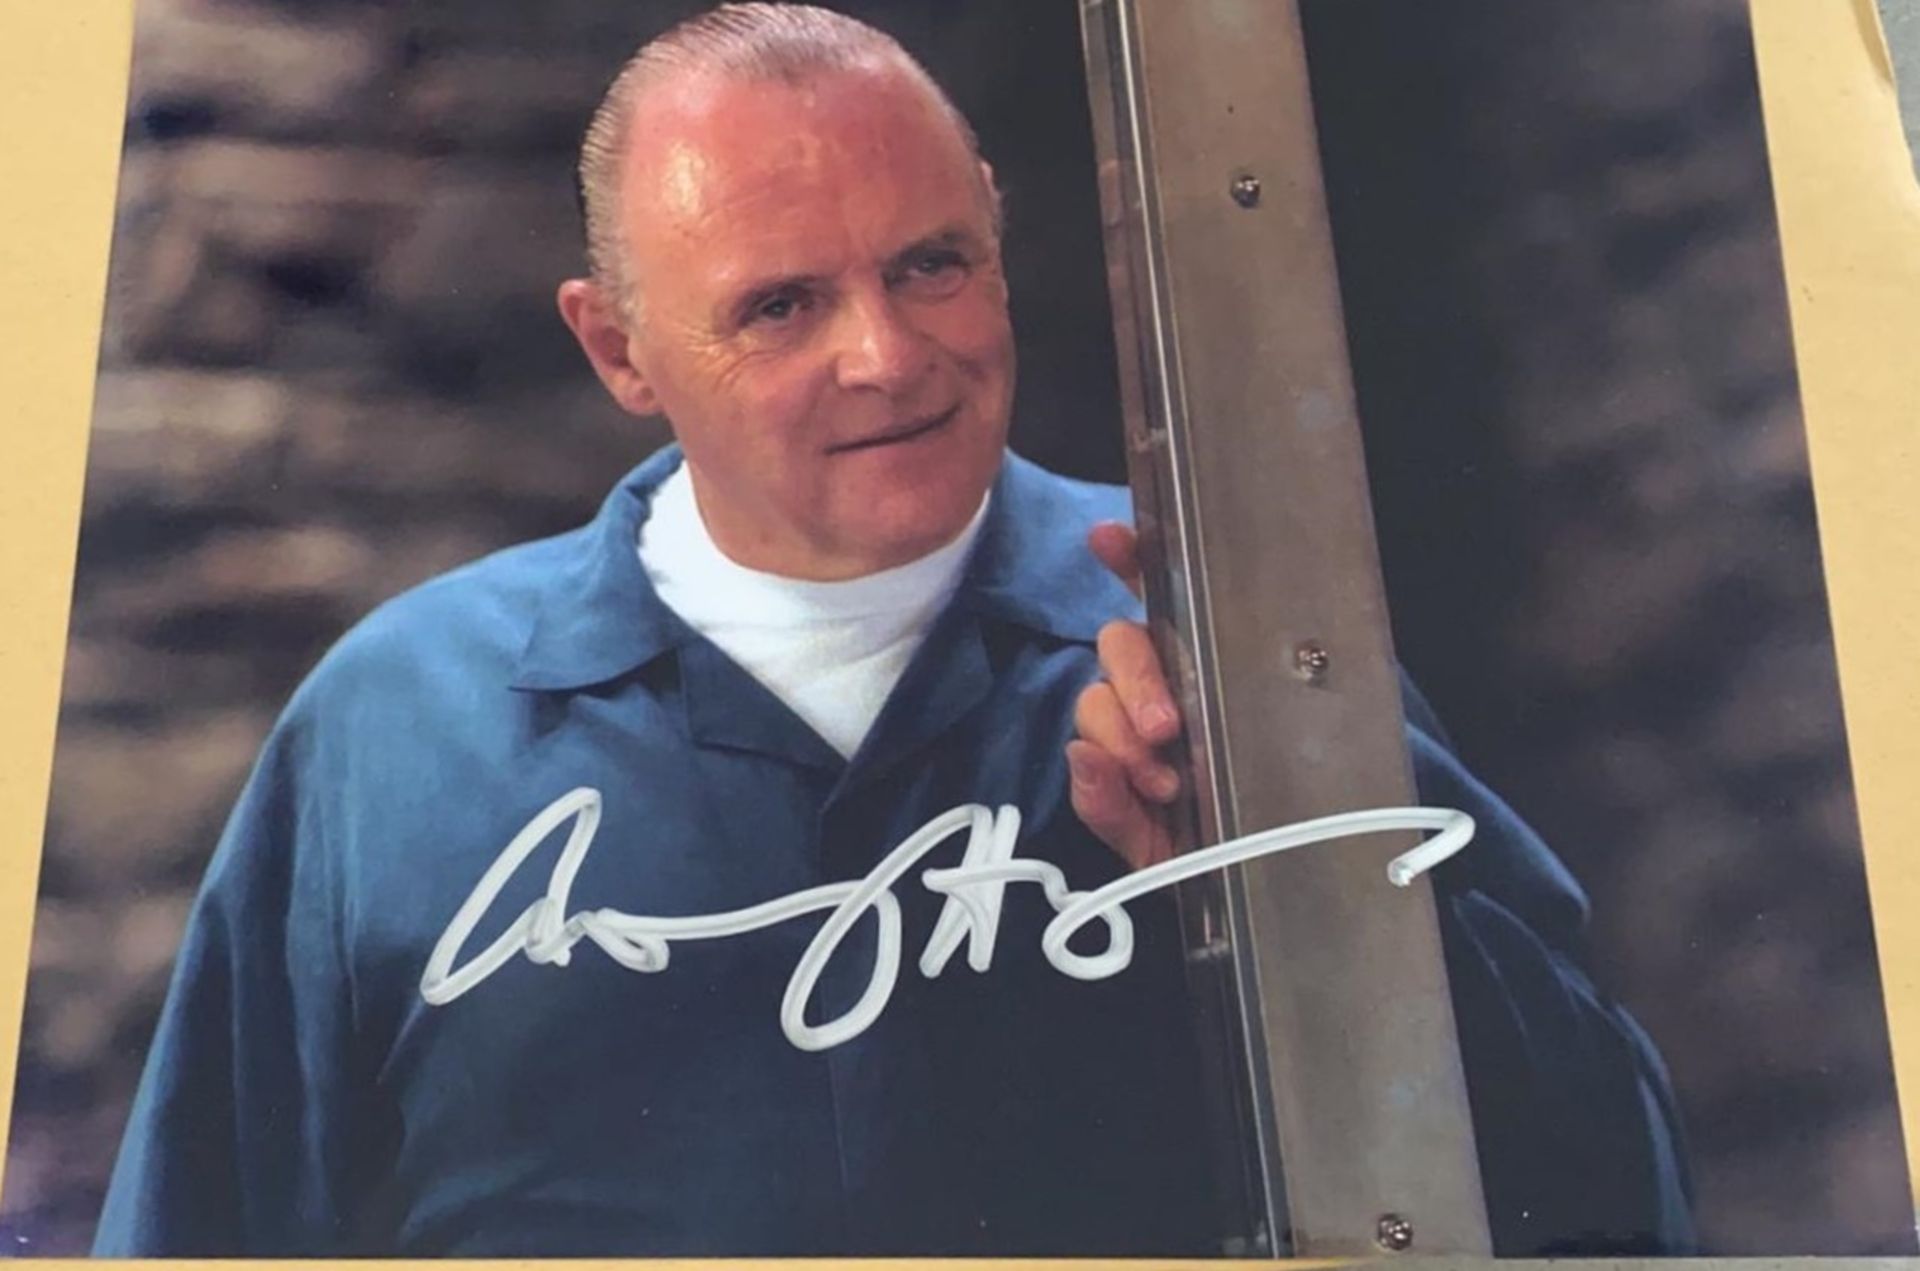 1 x Signed Autograph Picture - ANTHONY HOPKINS HANNIBAL - With COA - Size 12 x 8 Inch - CL590 - - Image 3 of 3